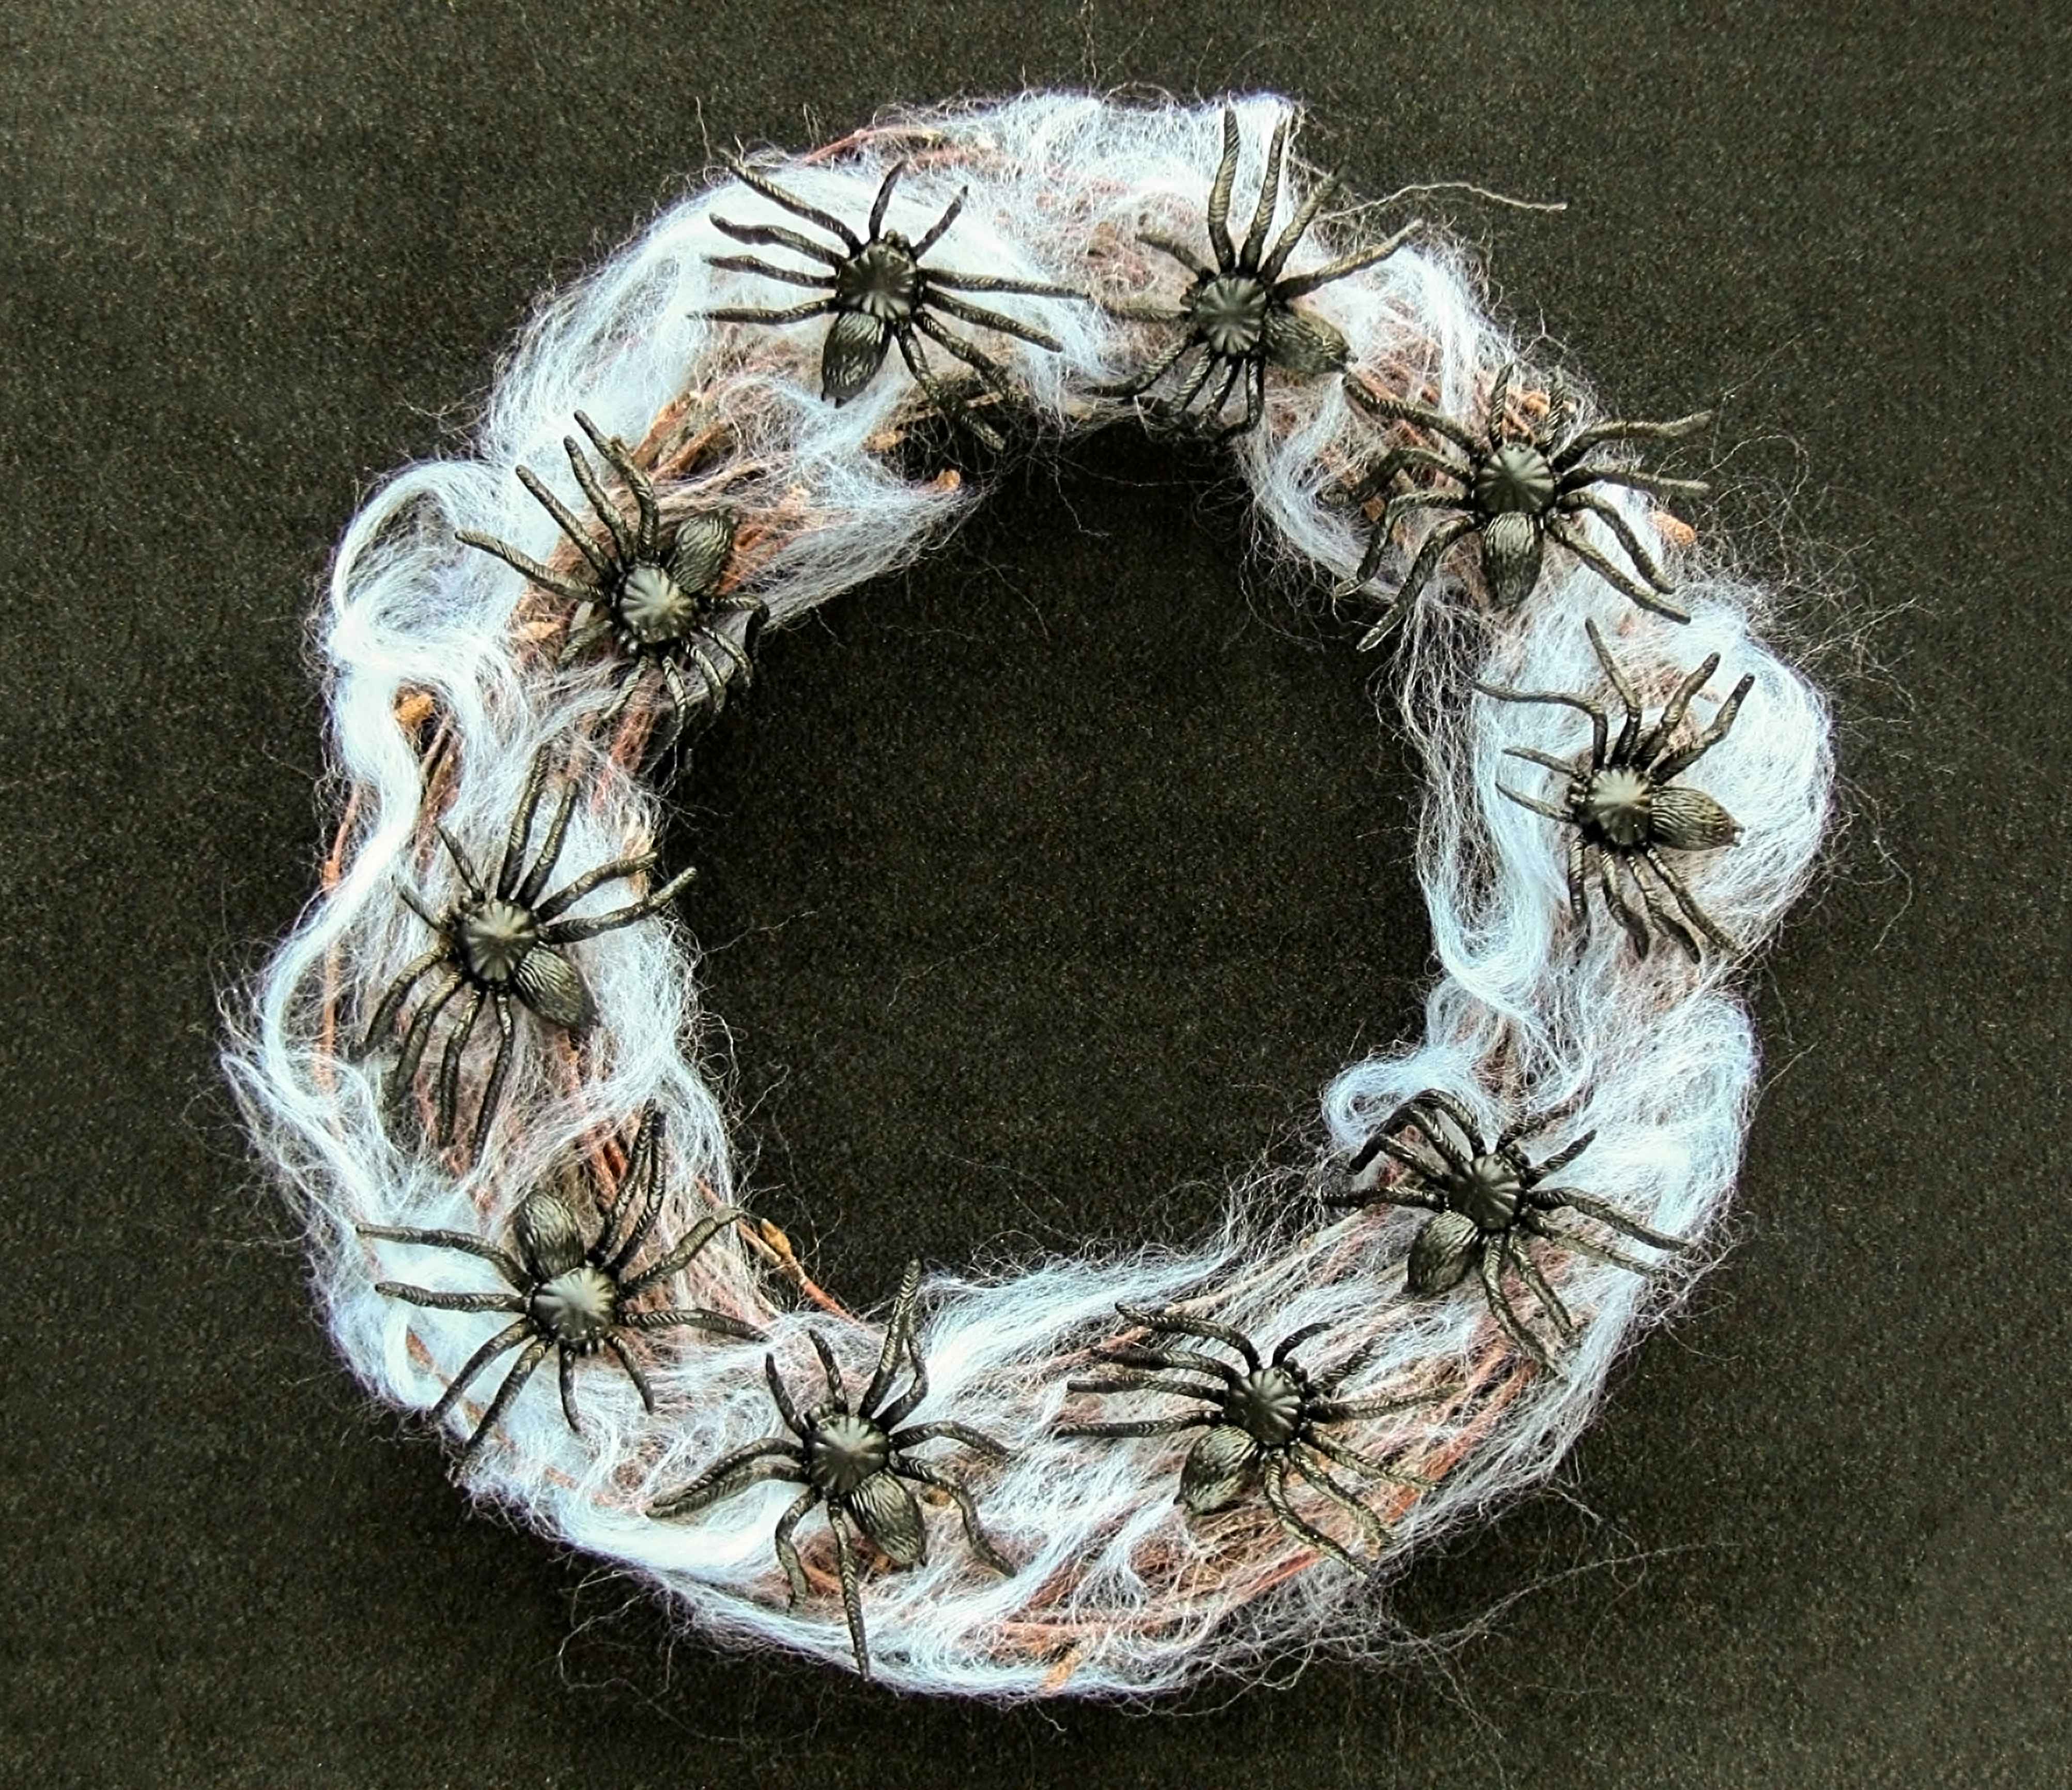 A wreath if spider webs and plastic spiders on a wood surface.